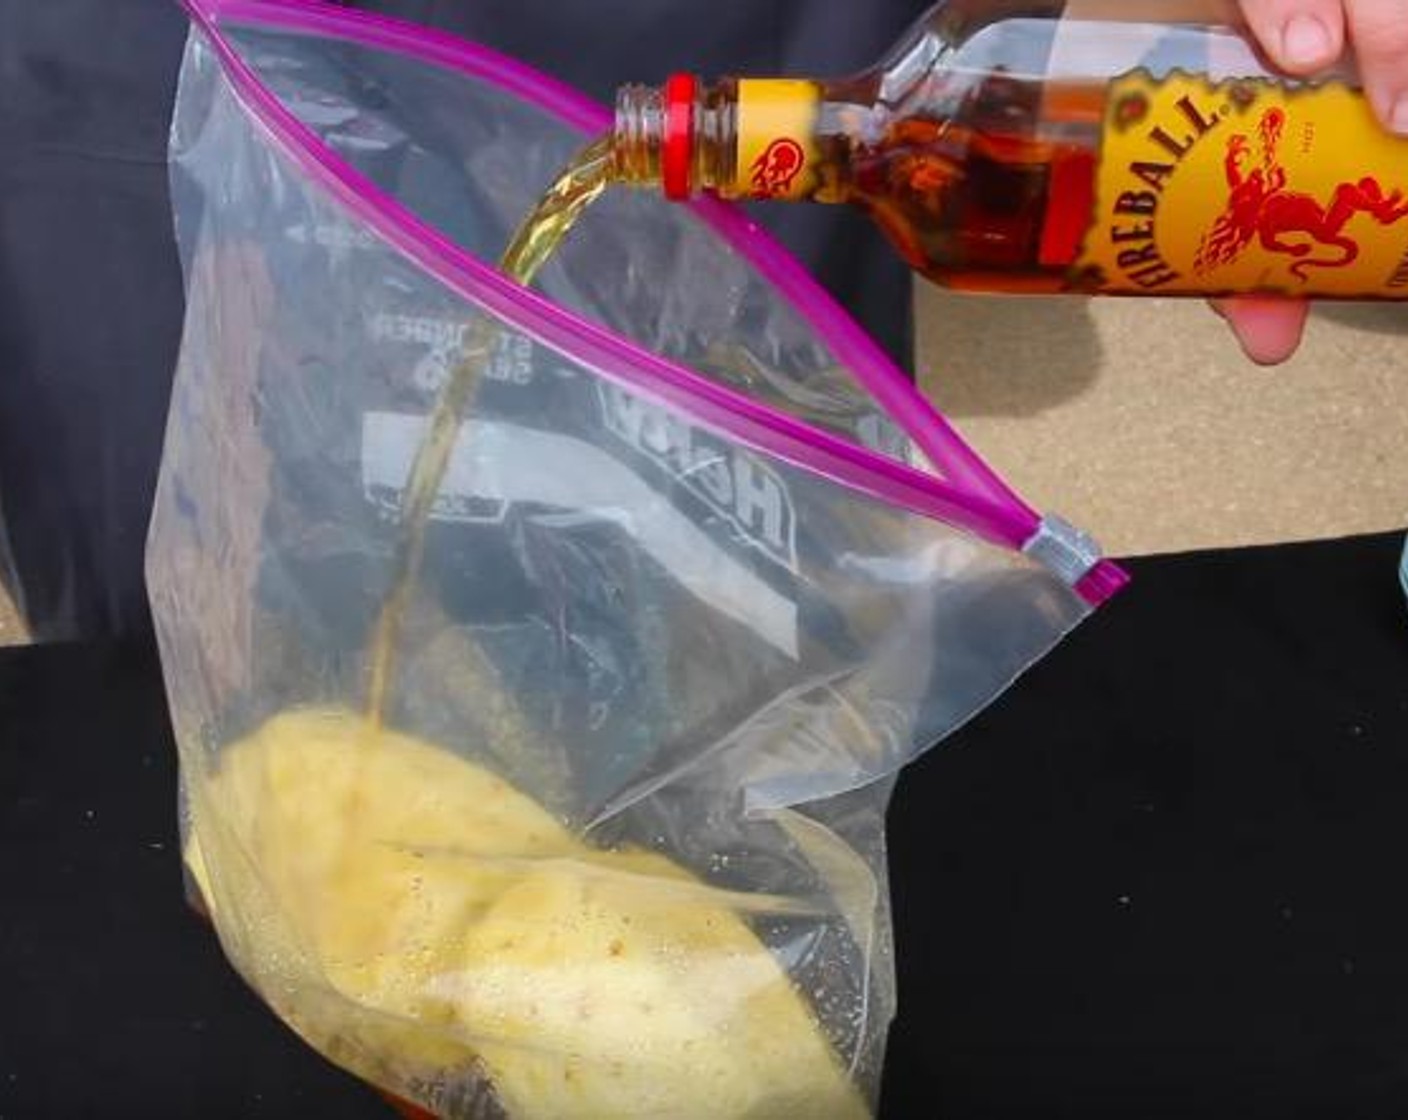 step 2 Place both pineapples in a ziplock storage bag and pour in the Fireball Whiskey (12 fl oz). Close the bag and squeeze as much air out as possible. Marinate for at least 2 hours in the refrigerator, turning halfway through.